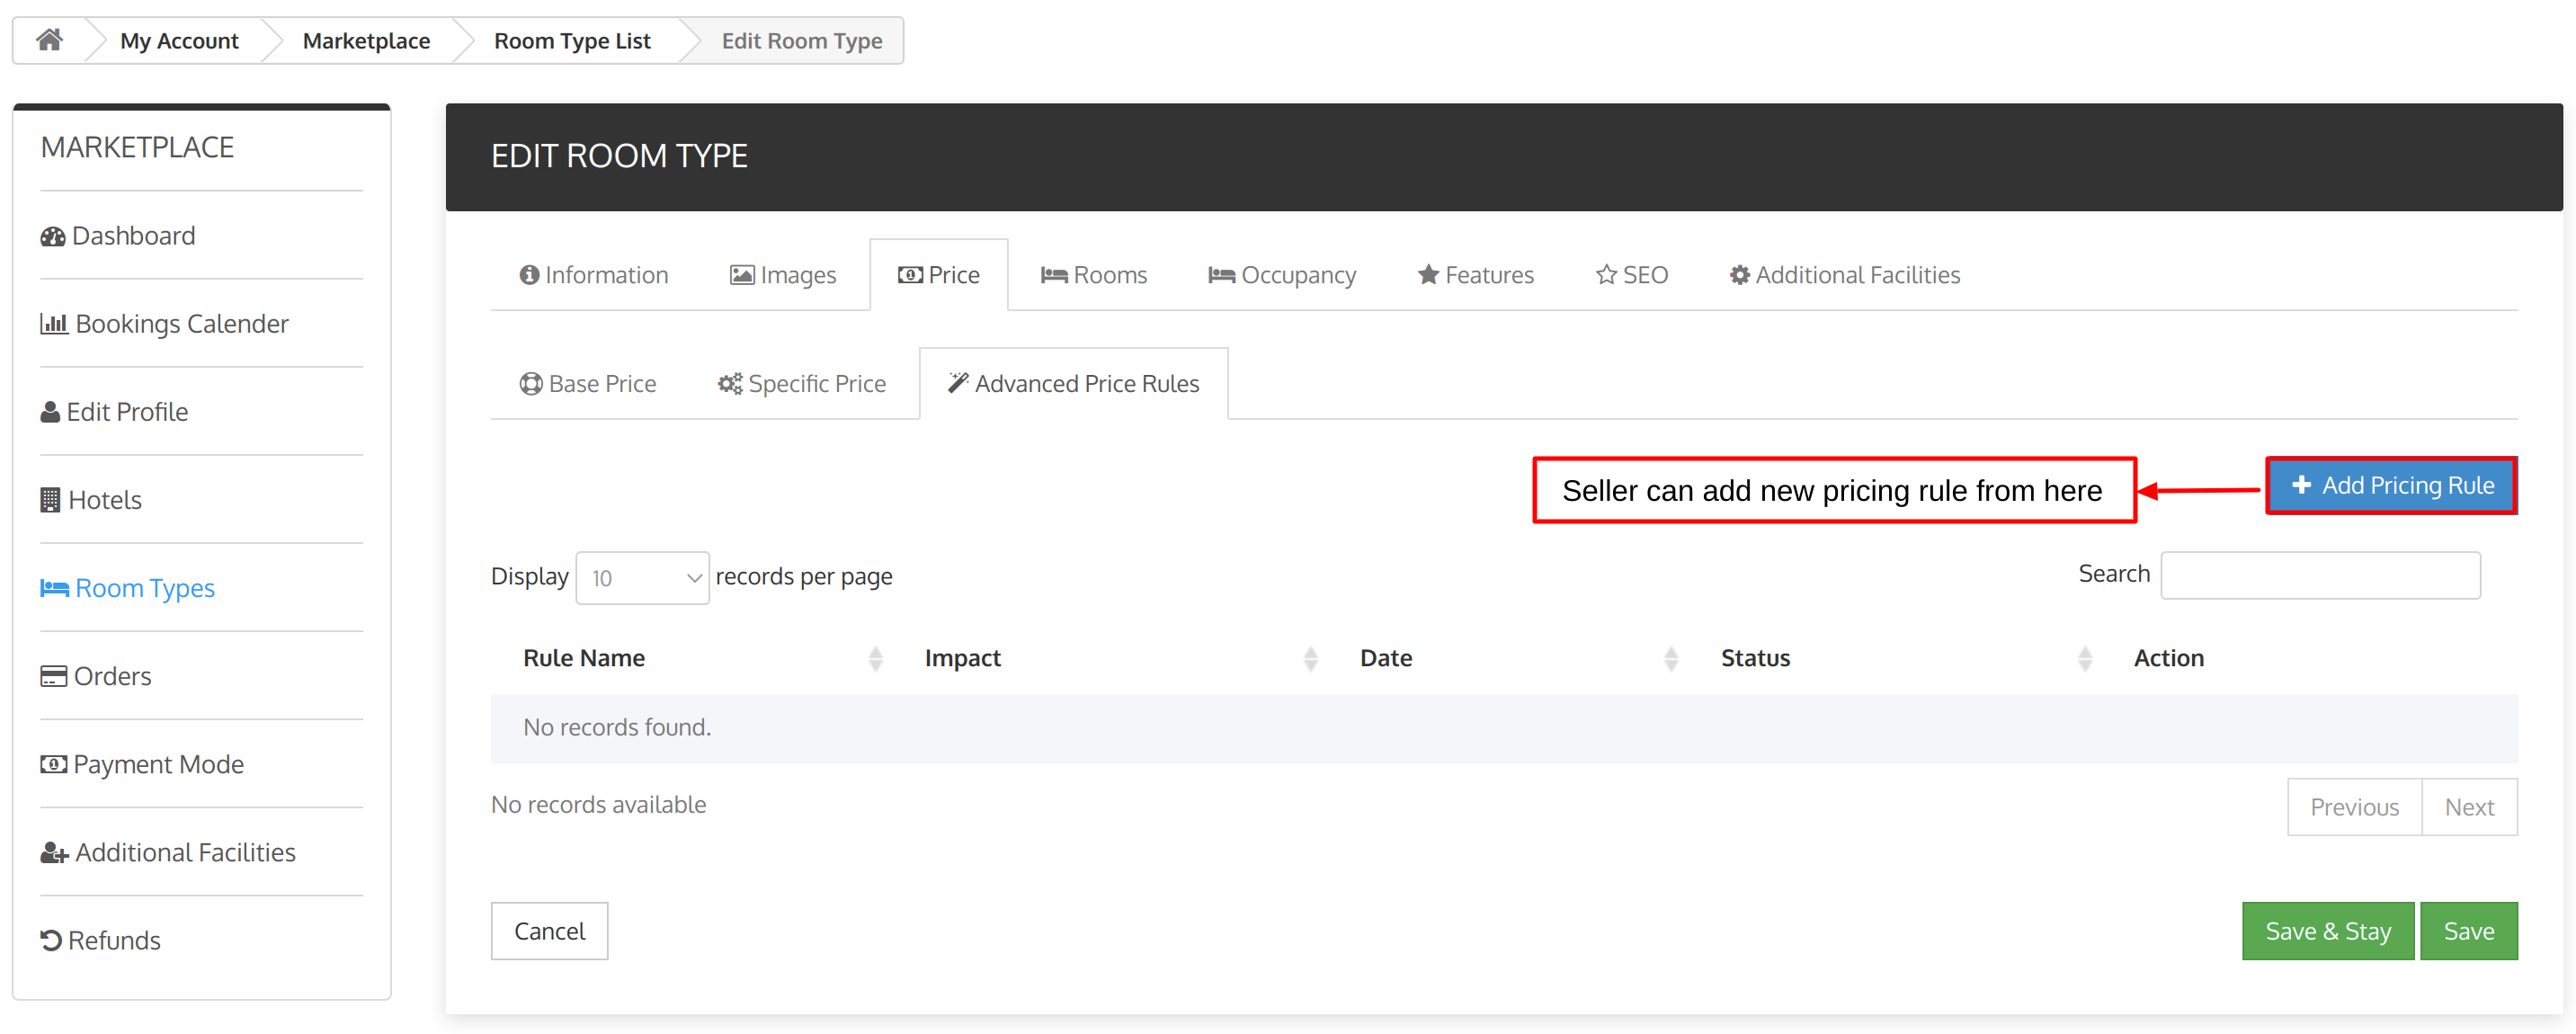 add new pricing rule option in seller room type tab